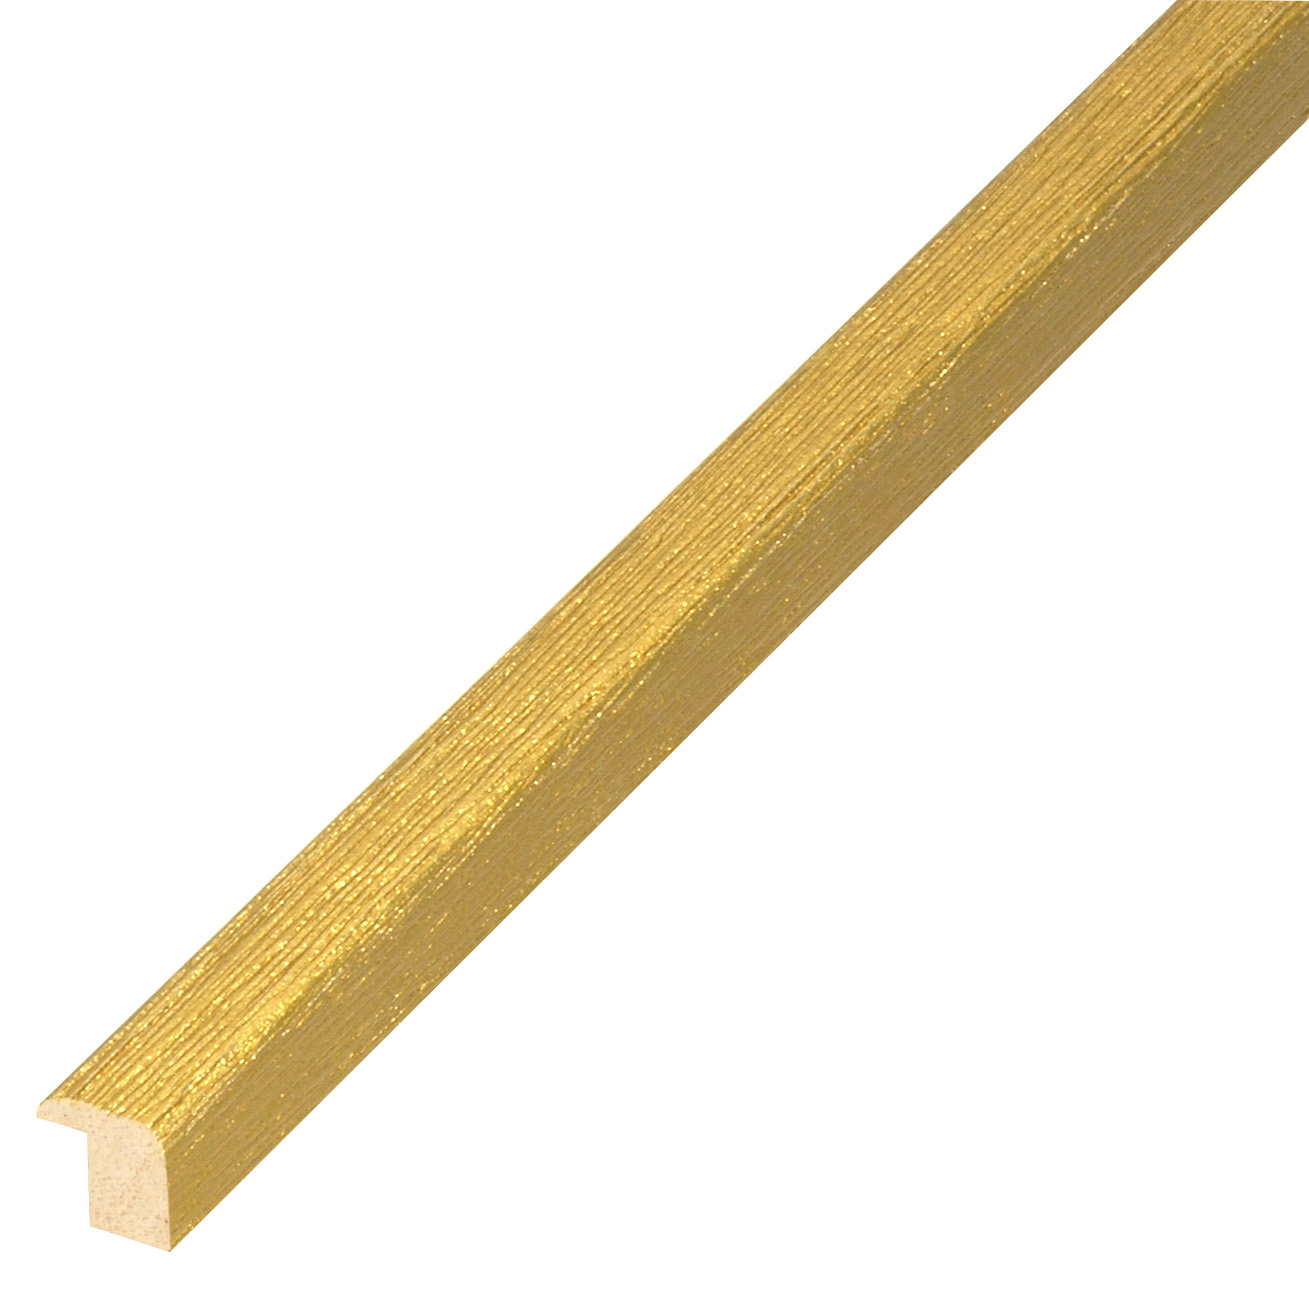 Moulding ayous woodworm treated mm 13x13 - scratched finish - Gold - 311ORO